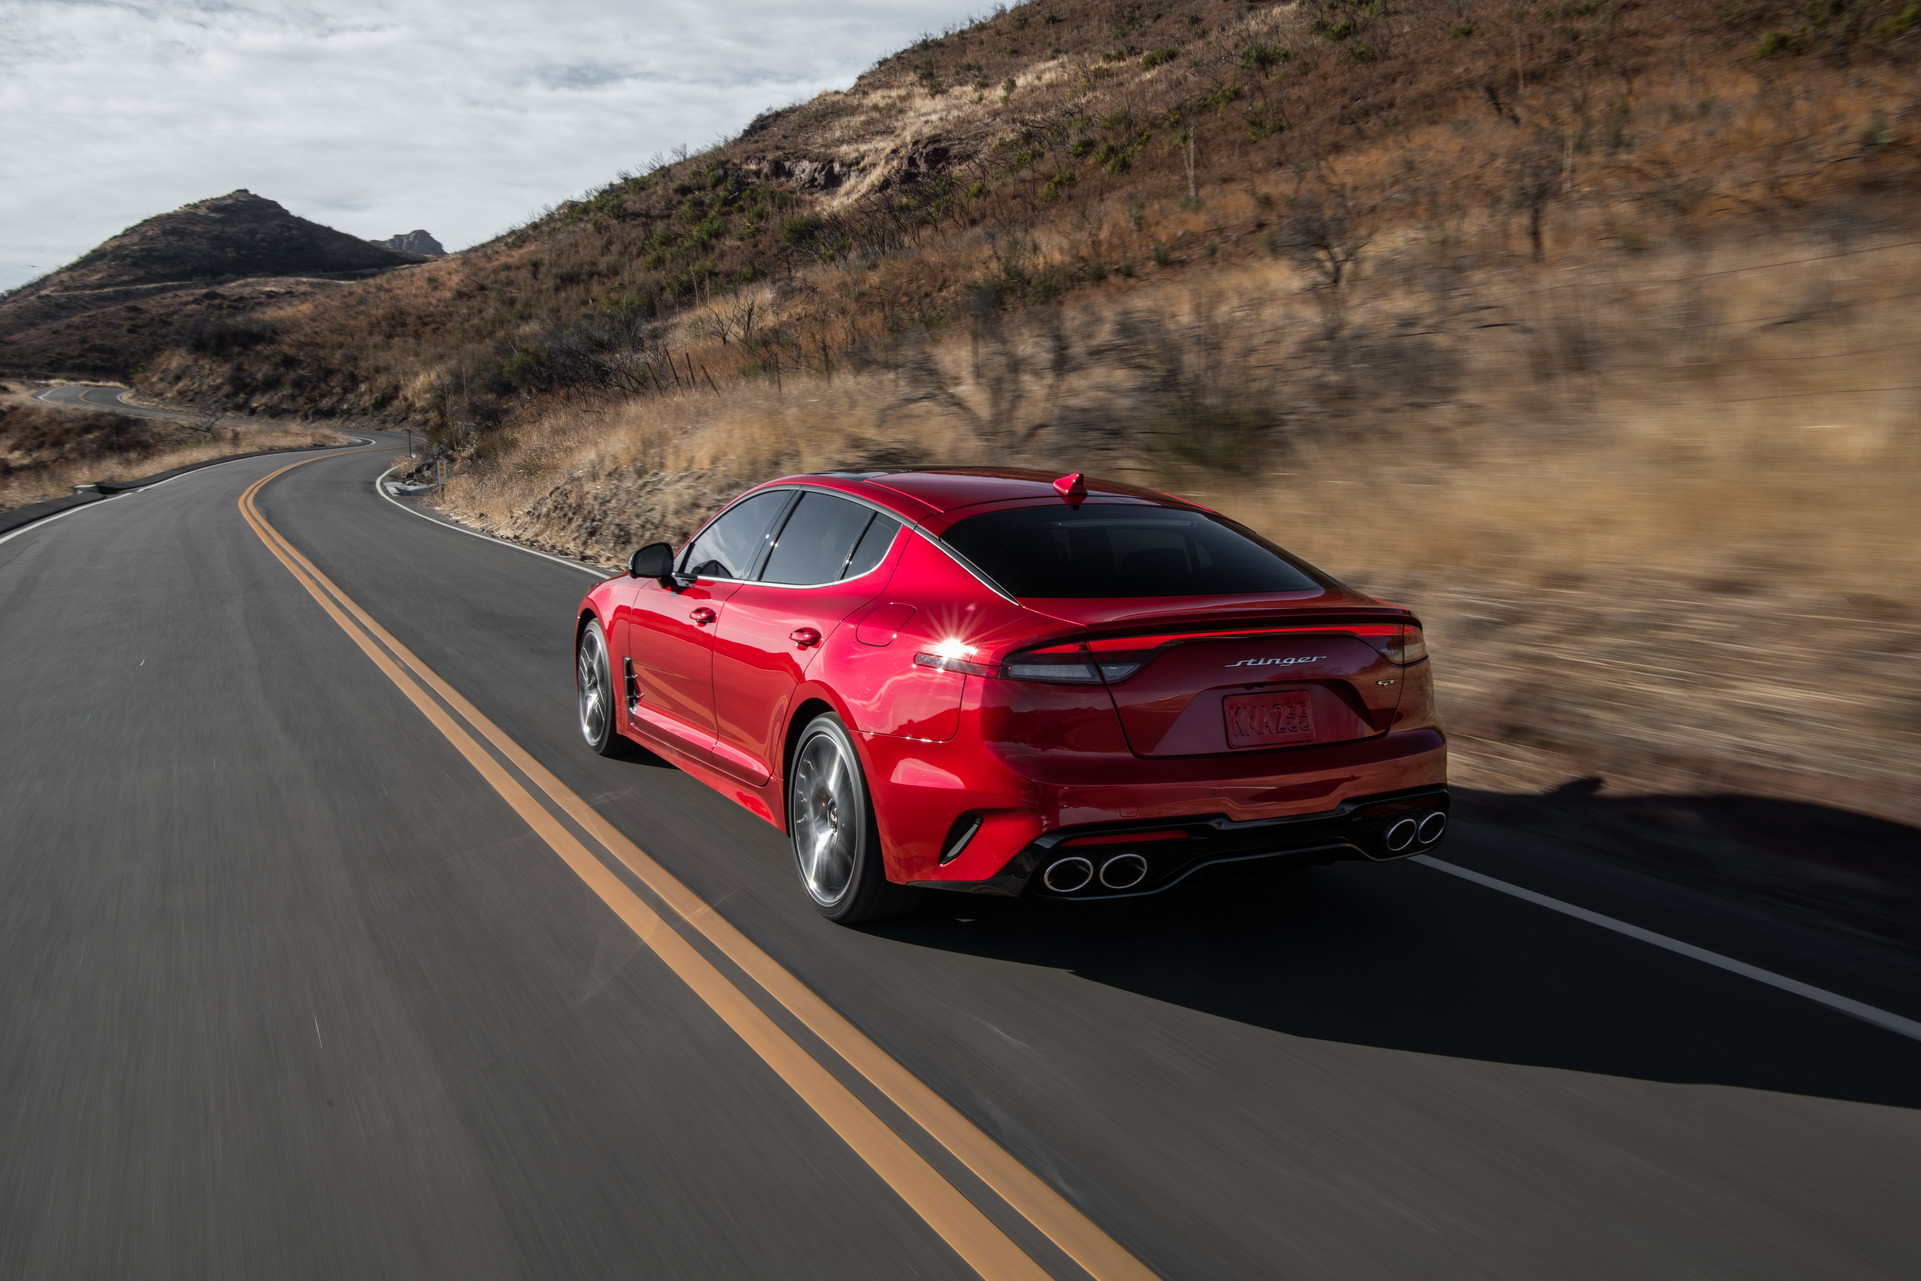 2022 Kia Stinger Is Official, Brings A New 300hp Base 2.5 Turbo And